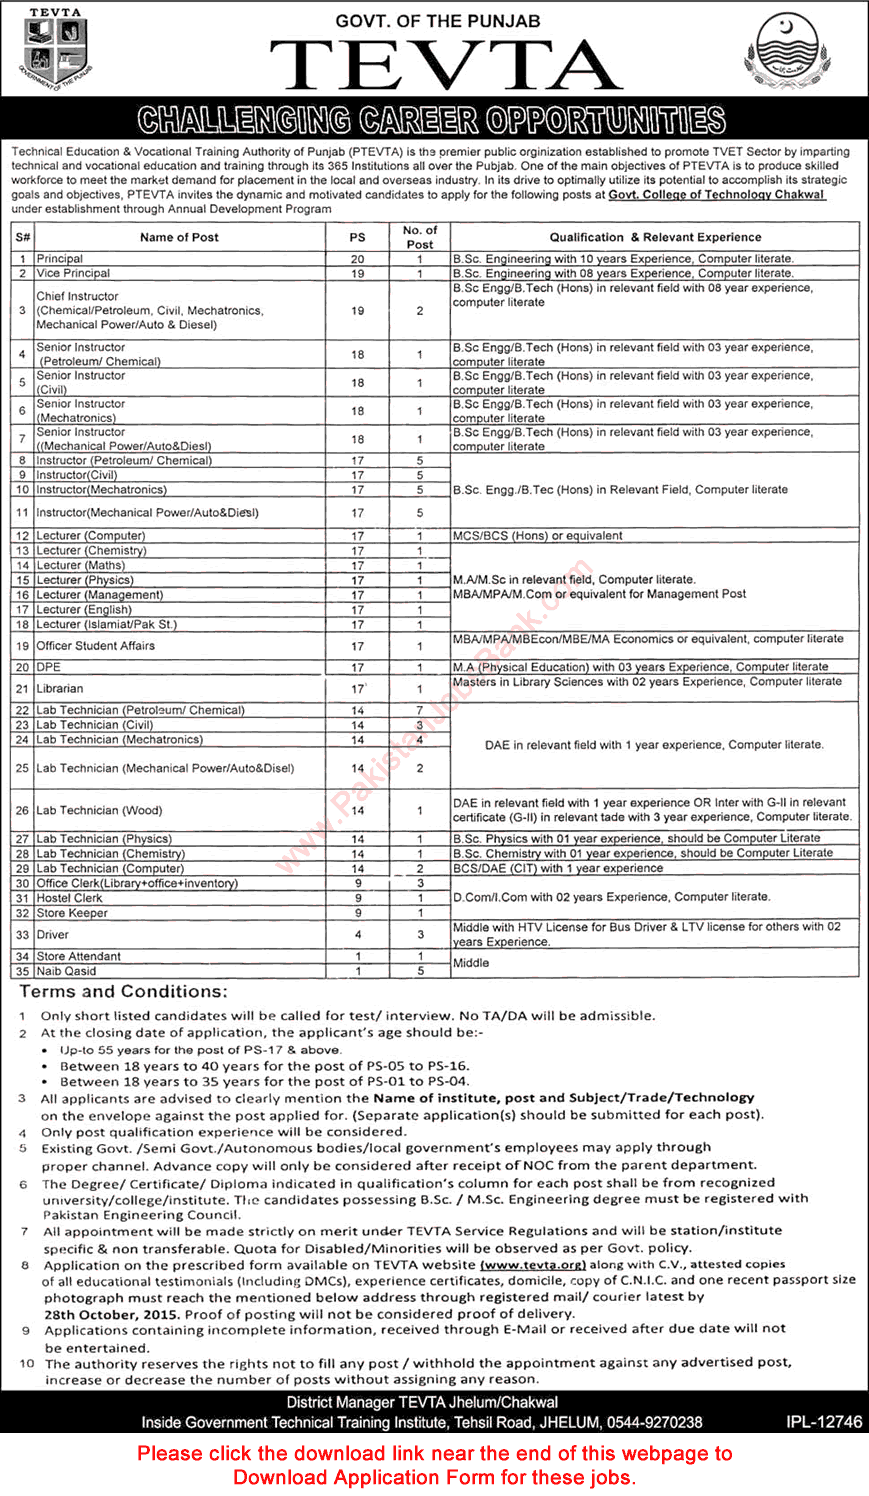 Government College of Technology Chakwal Jobs 2015 October TEVTA Application Form Download